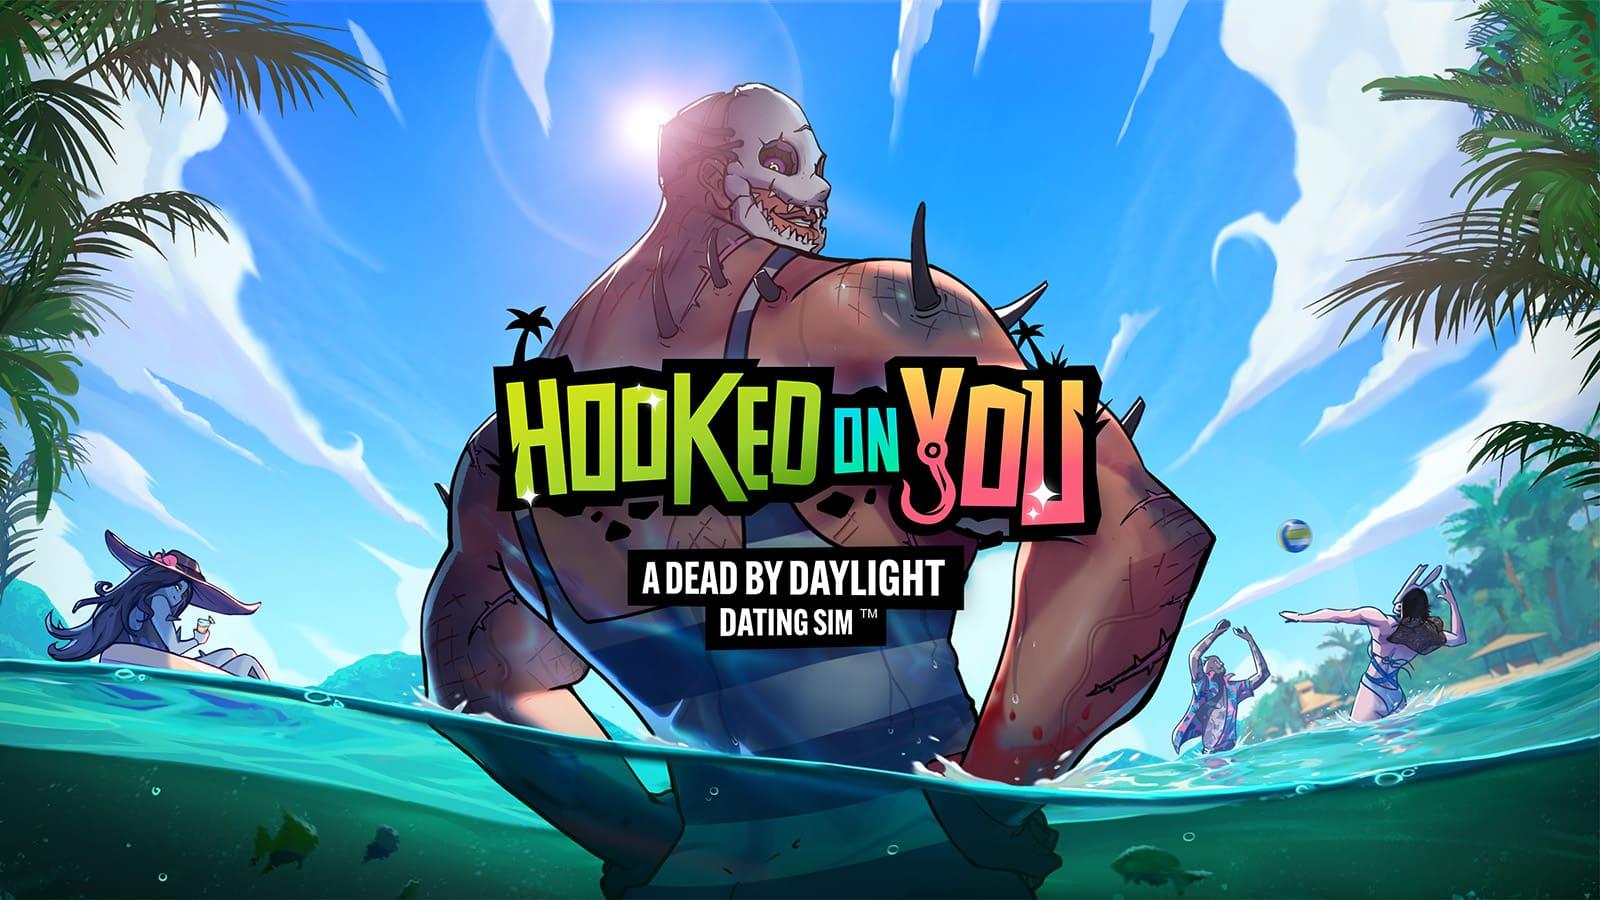 Every Killer In Hooked On You: A Dead By Daylight Dating Sim Explained